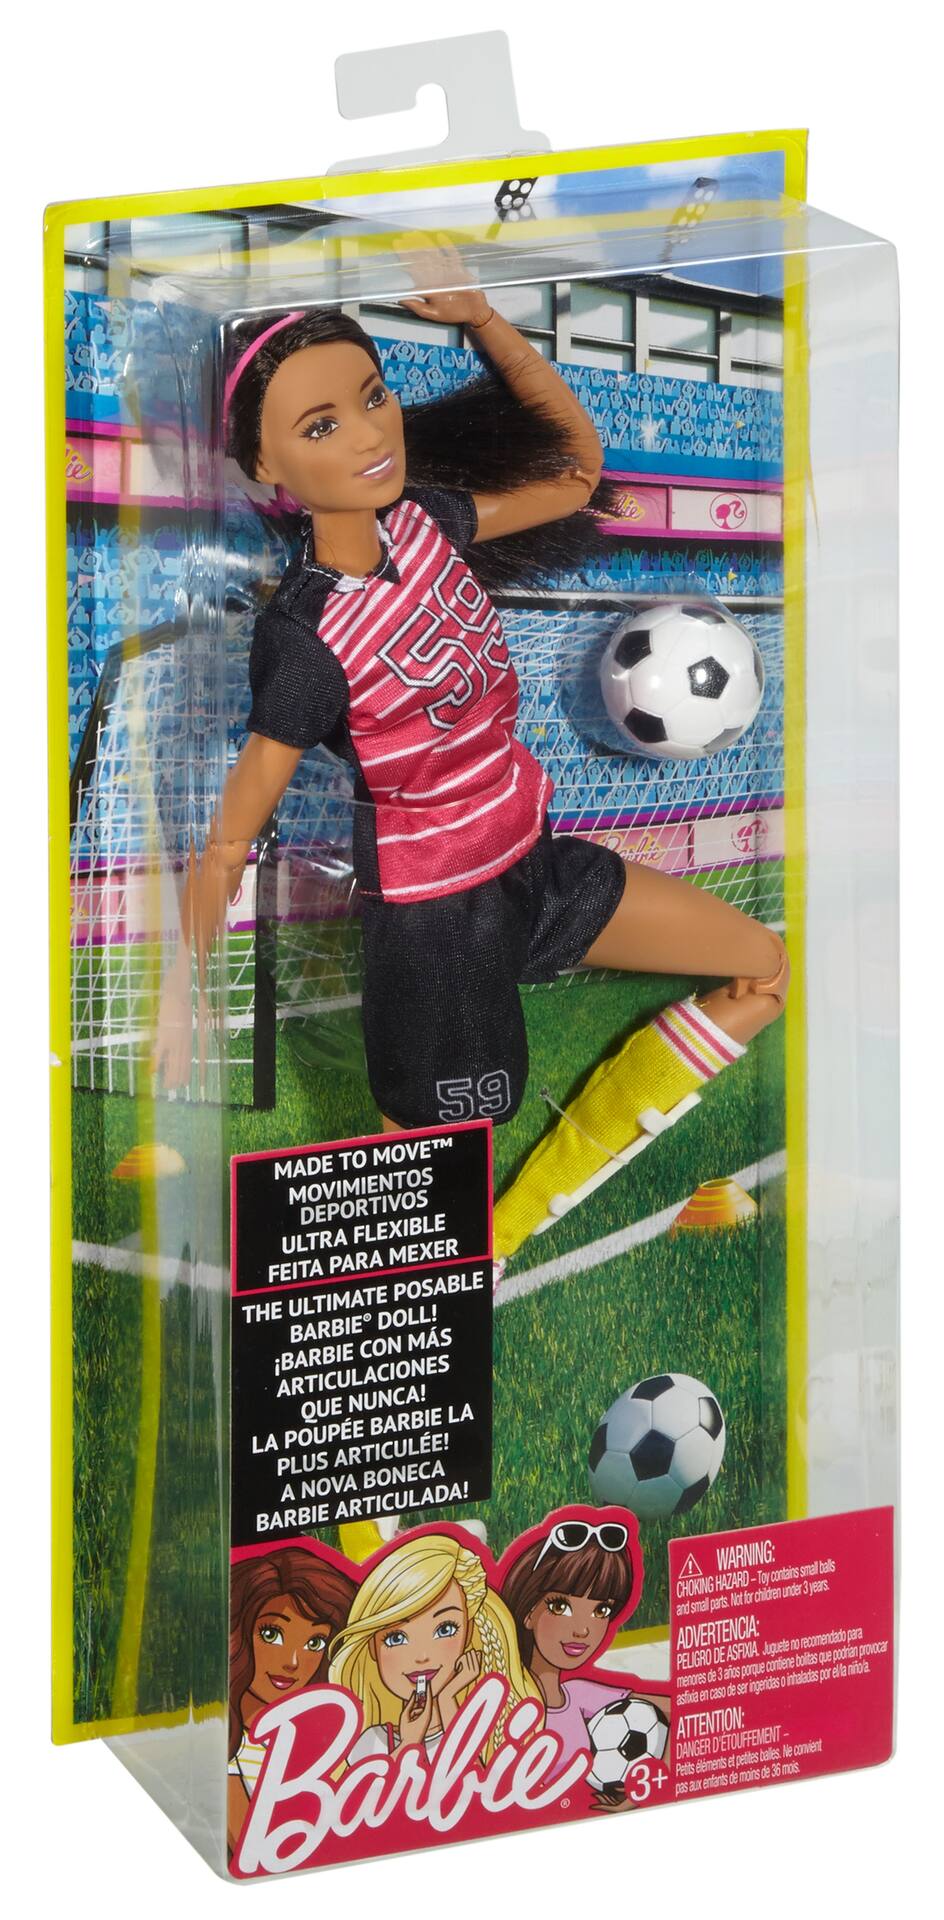 Paper Mattel African American New Toy Made To Move Soccer Player Barbie 